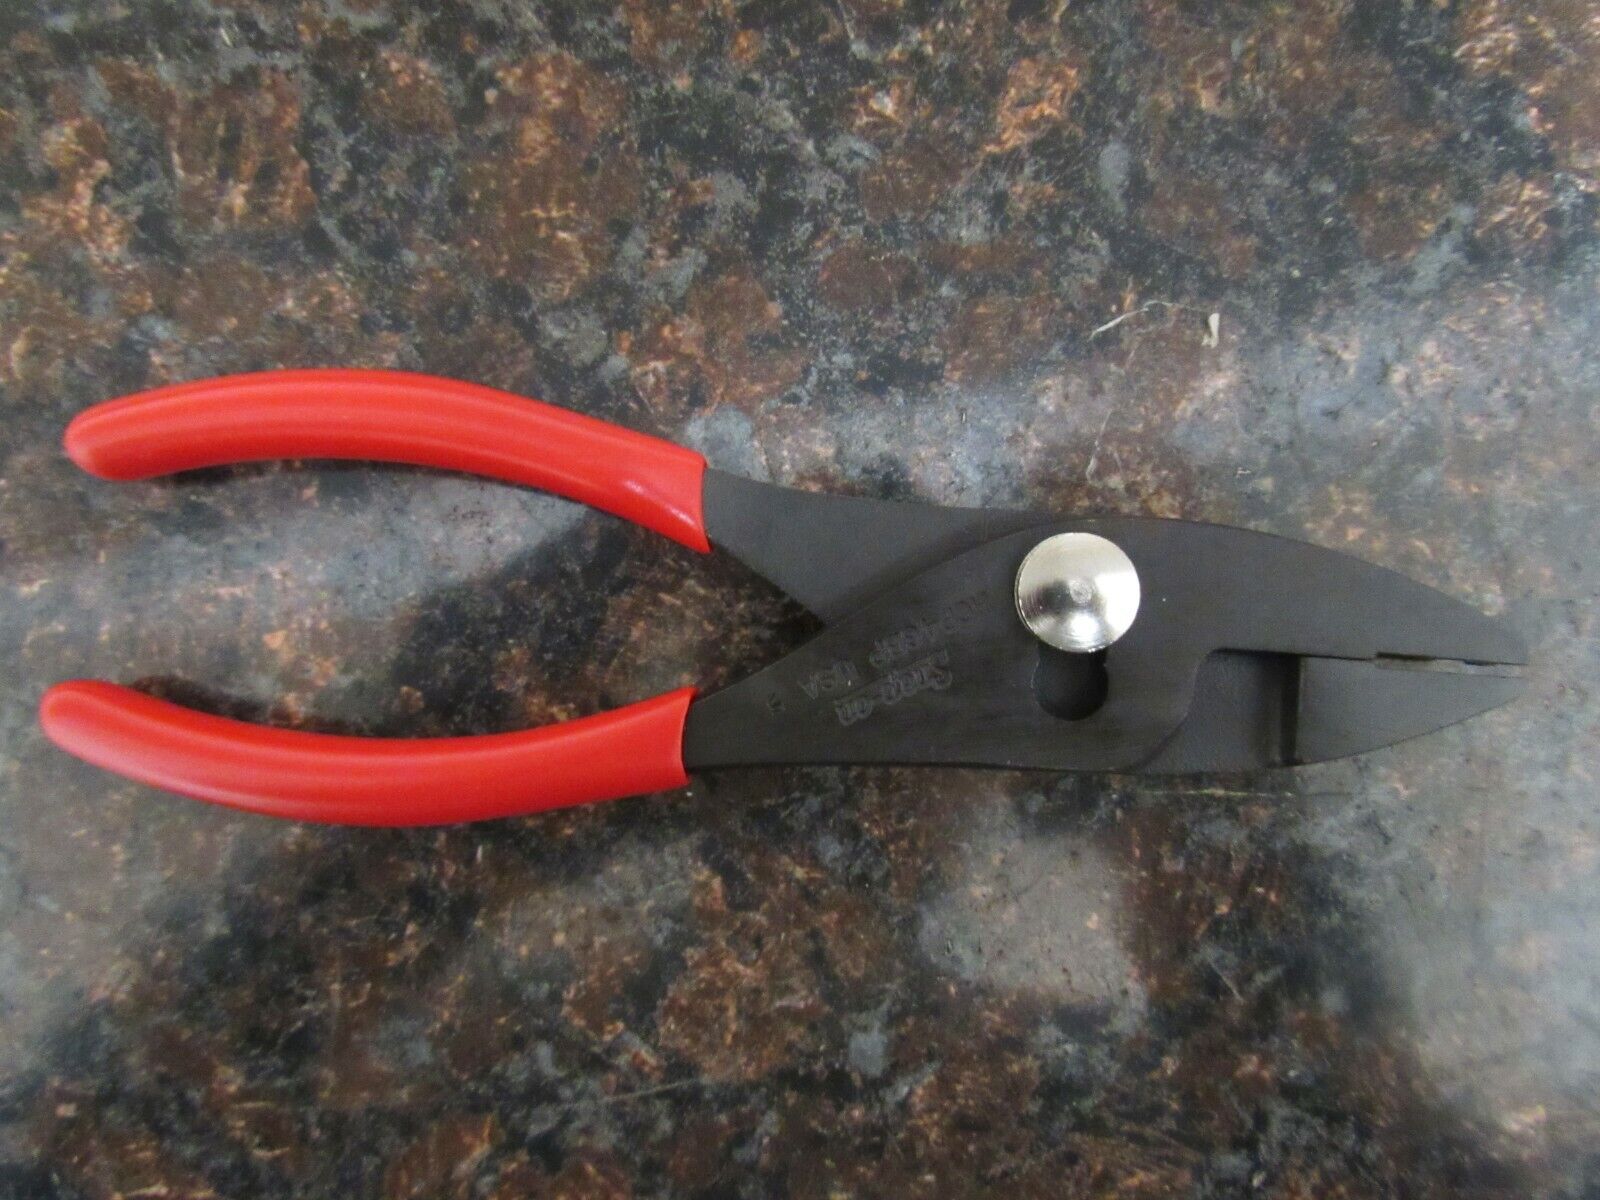 Snap-on Red Handle 6 1/2" Hose Clamp Pliers Item #s46